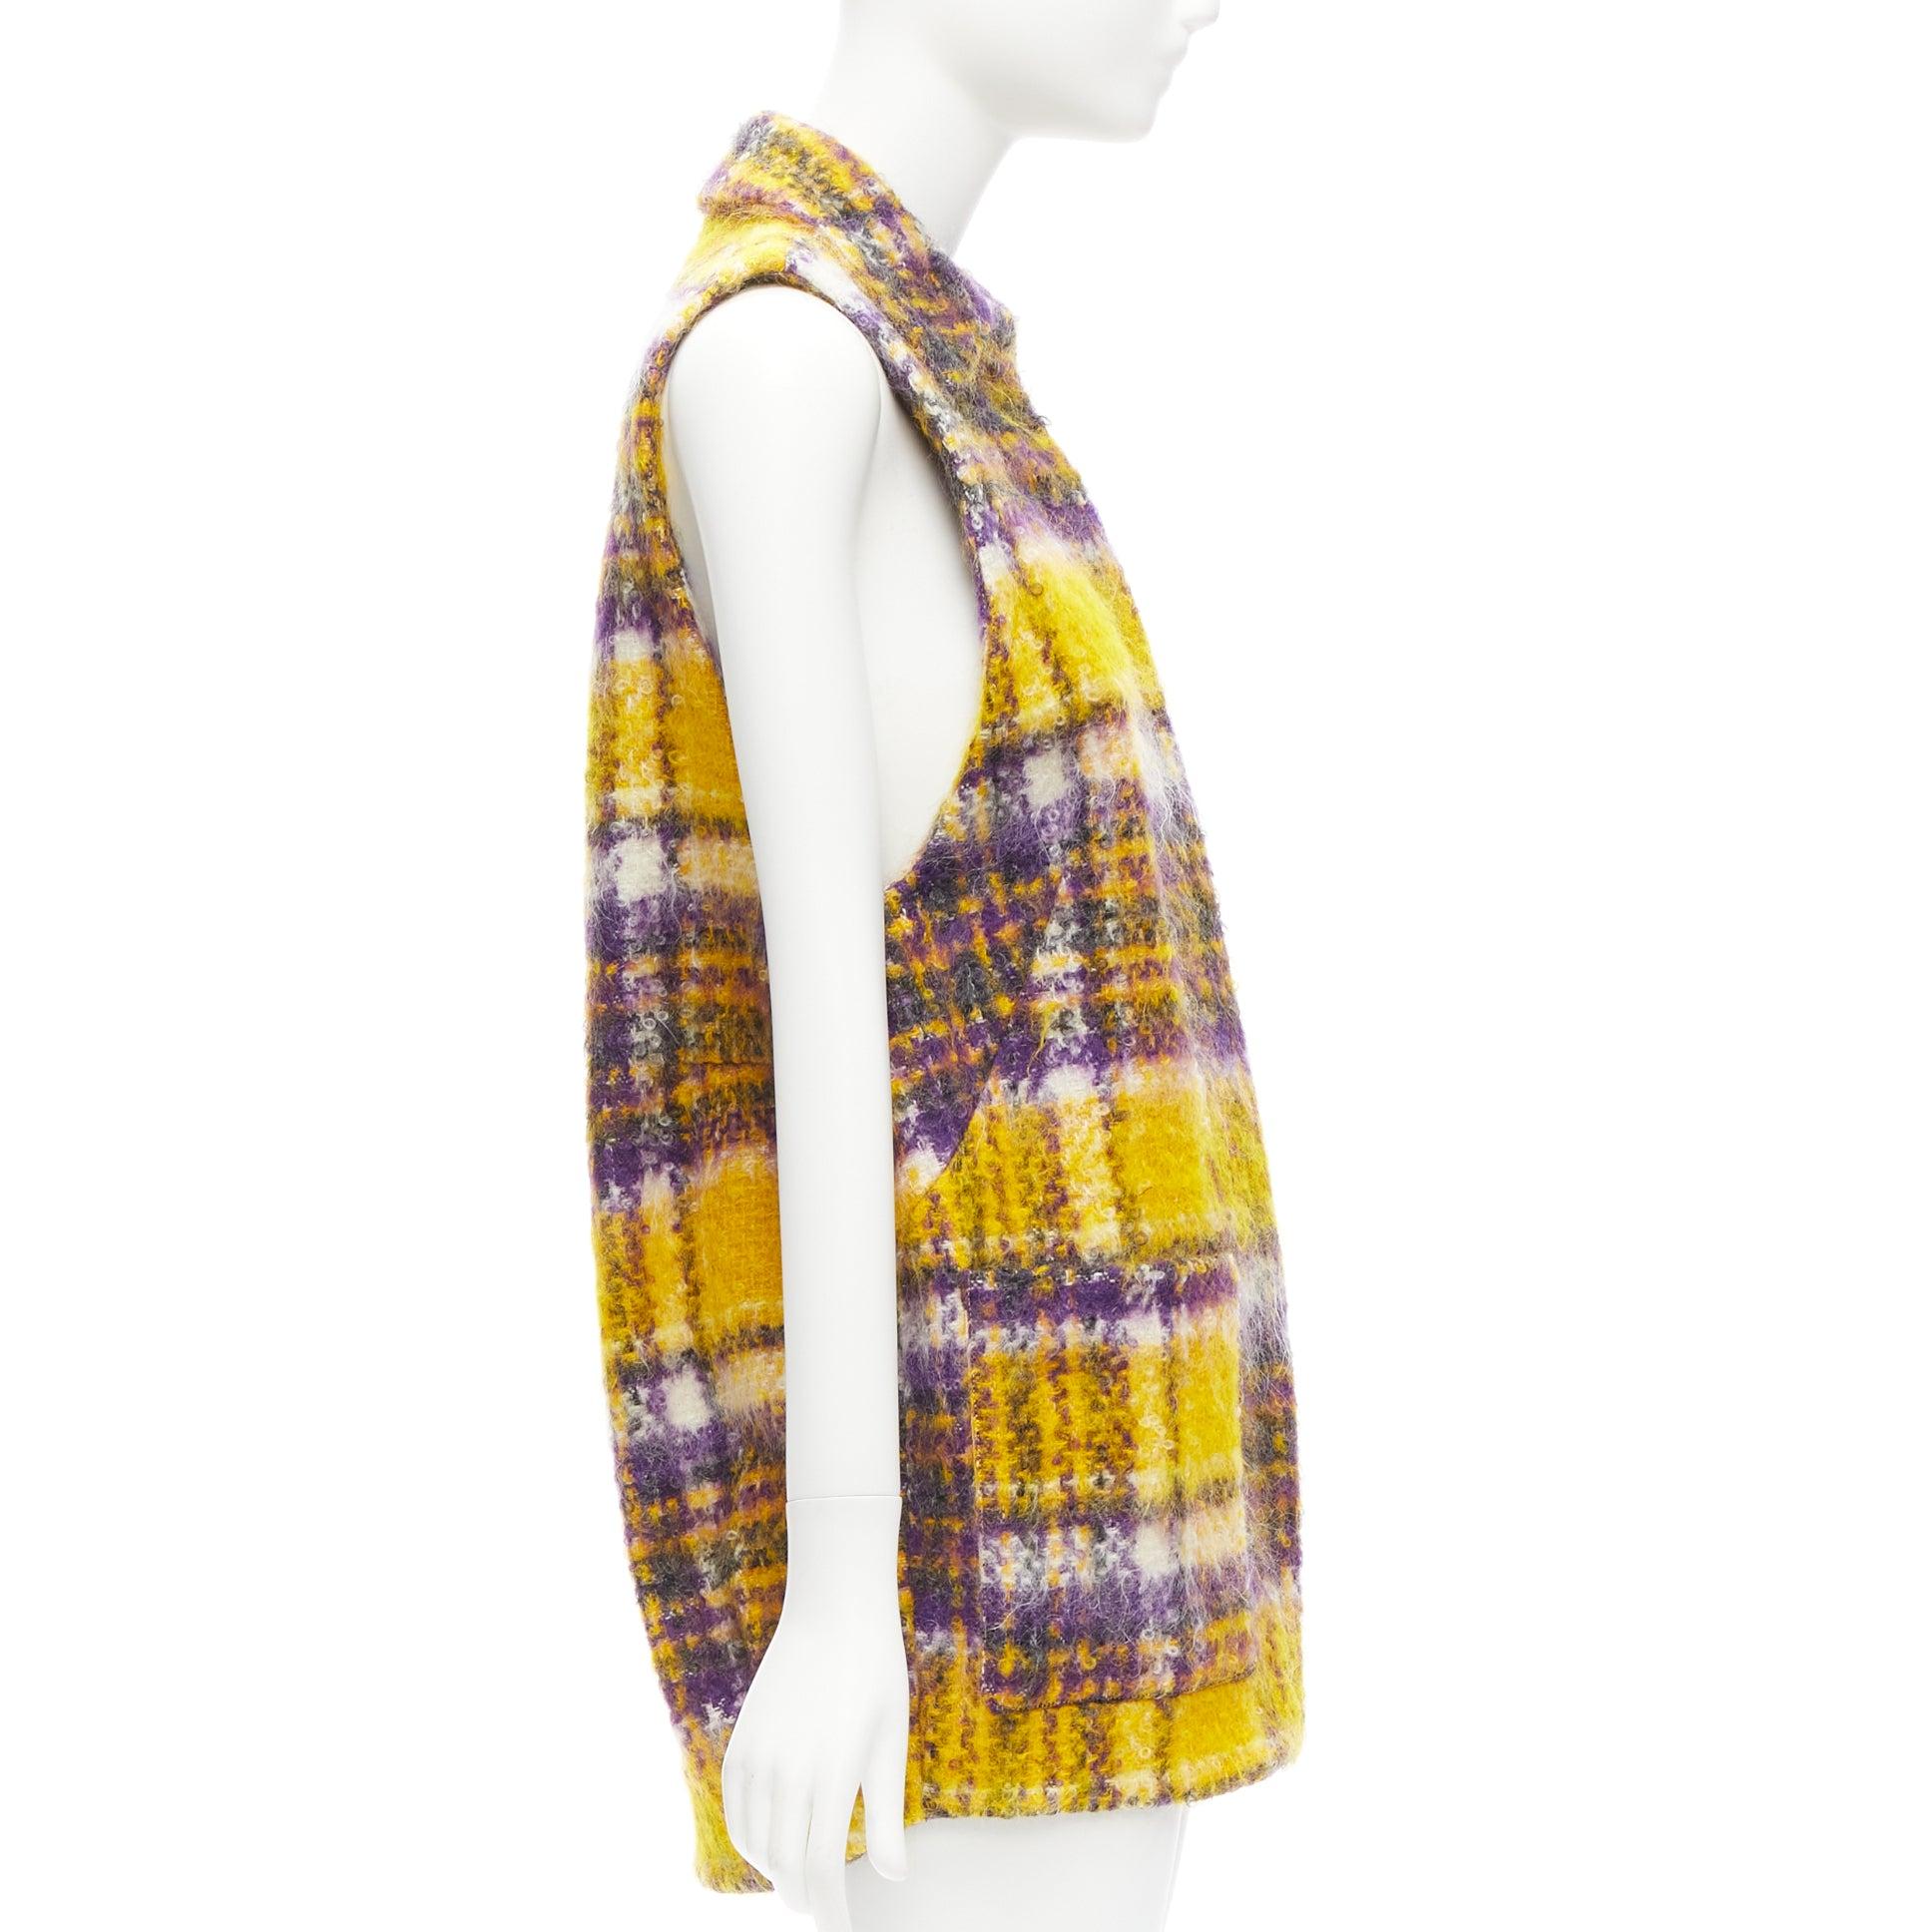 MARNI yellow purple plaid check mohair blend boxy sleeveless coat IT36 XS
Reference: CELG/A00245
Brand: Marni
Material: Cotton, Mohair, Blend
Color: Purple, Yellow
Pattern: Plaid
Closure: Snap Buttons
Lining: Black Fabric
Extra Details: Hidden snap